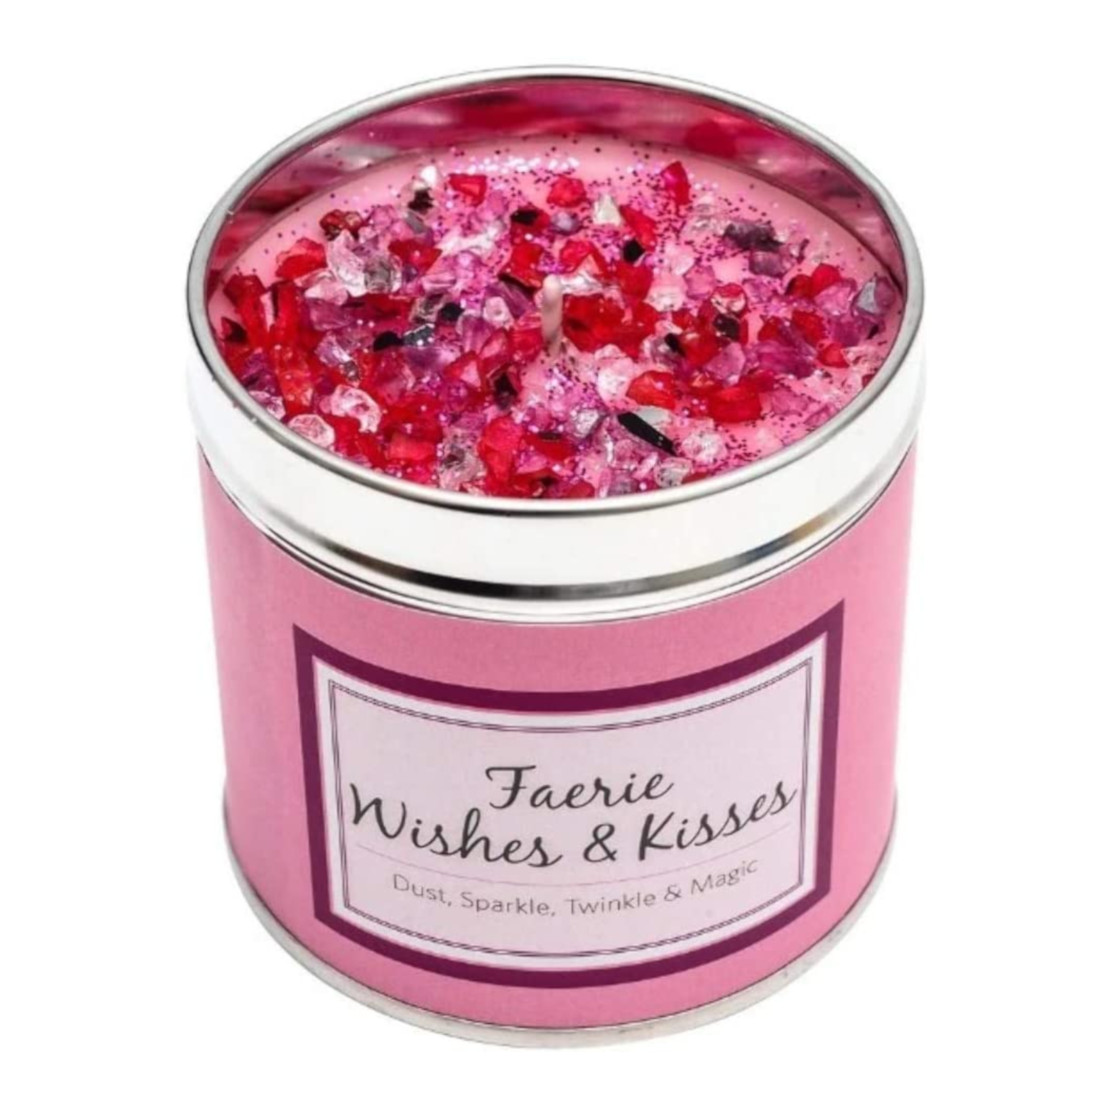 Best Kept Secrets Faerie Wishes and Kisses Tin Candle